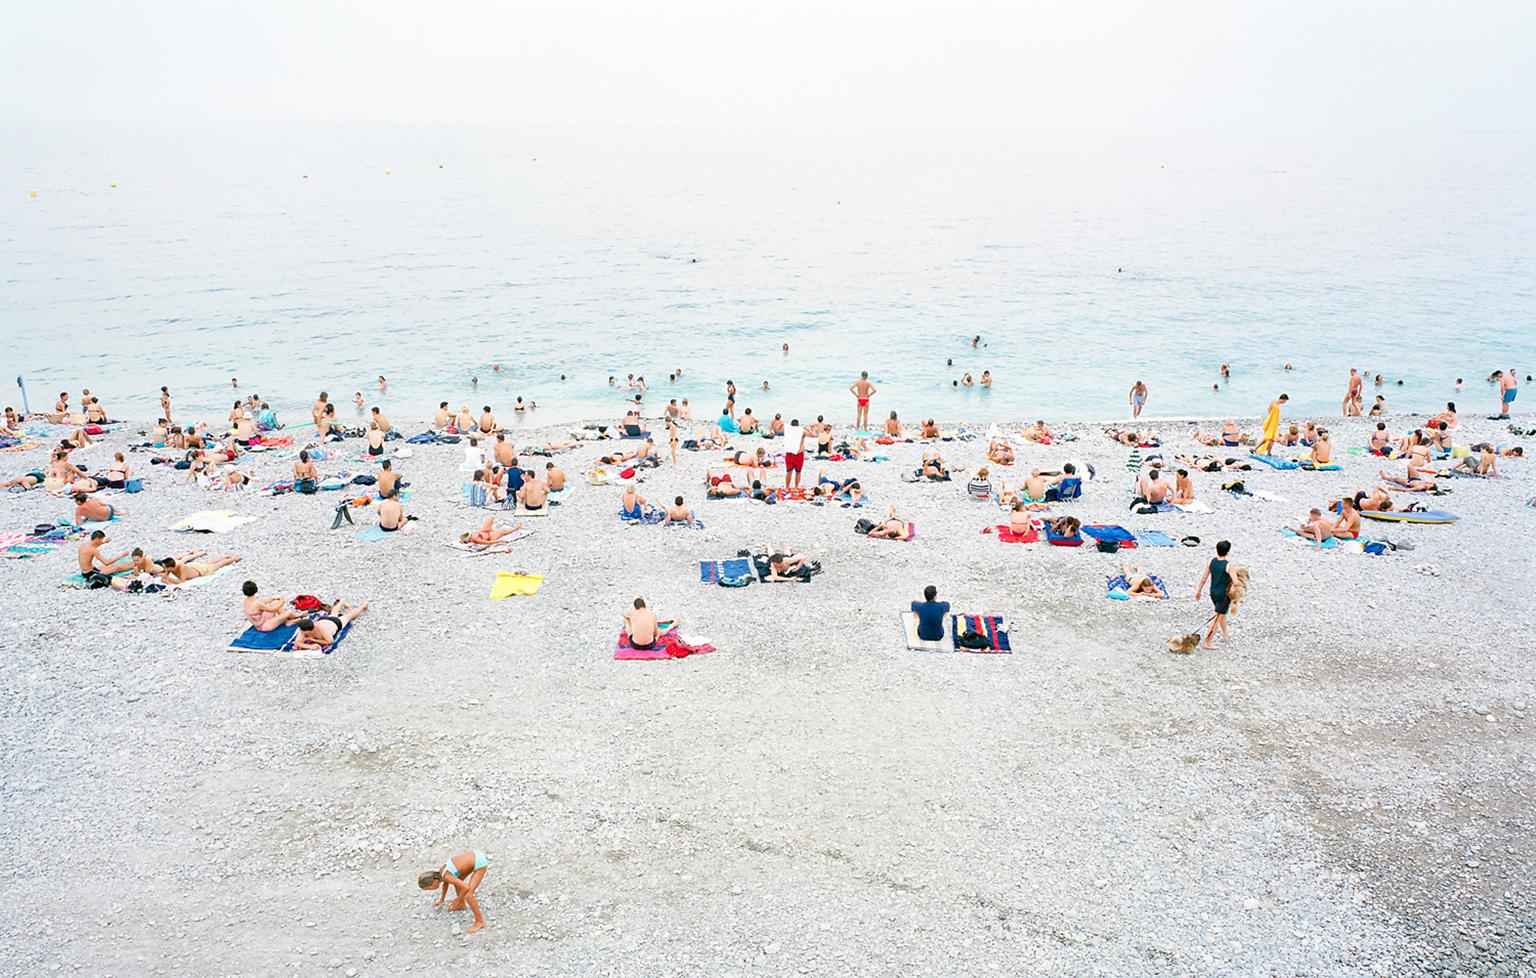 Frank Schott Color Photograph - Nizza - large format photograph of summer beach scene in South of France